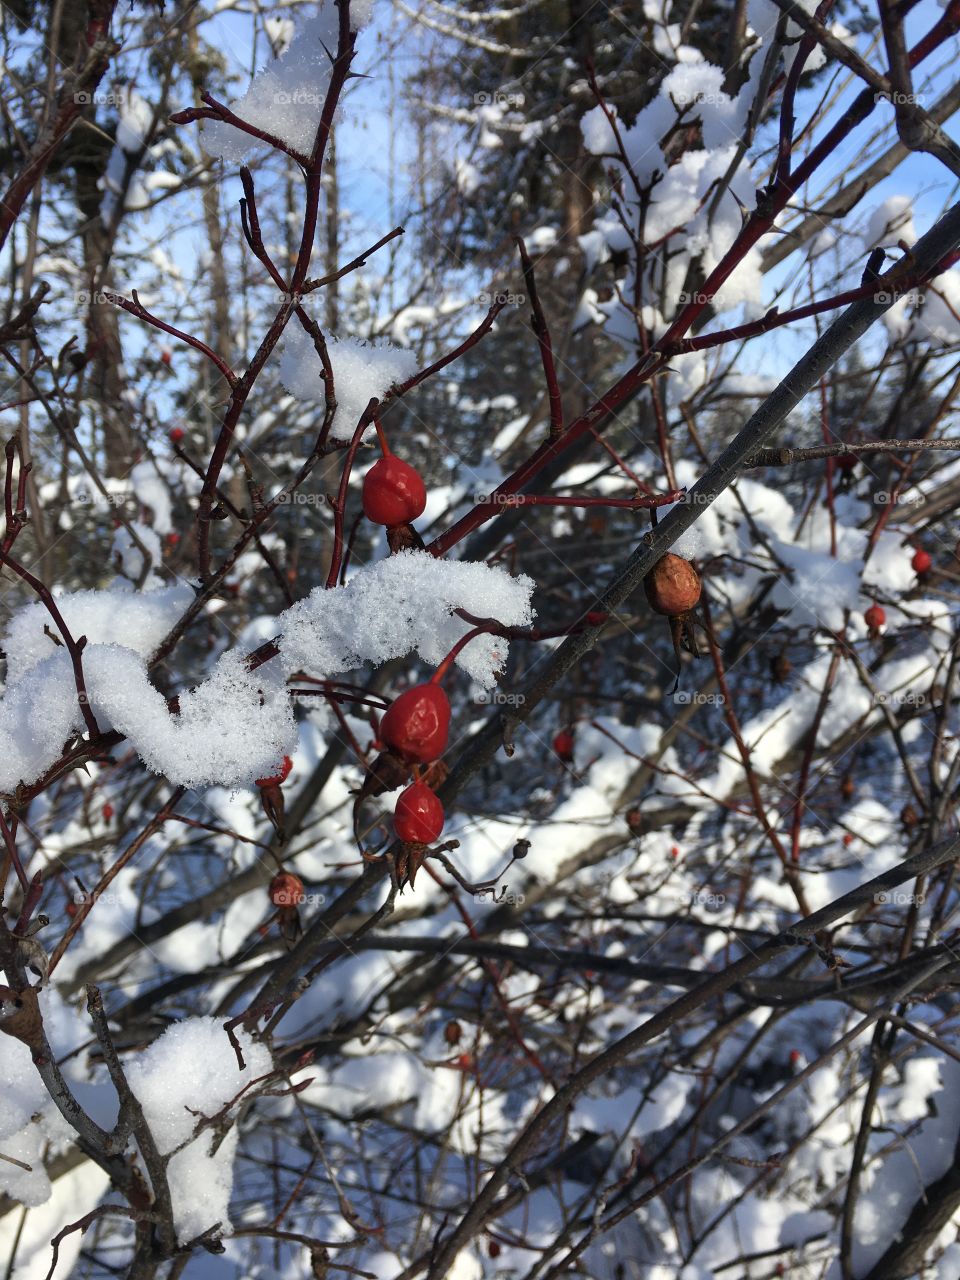 Snow and berries 